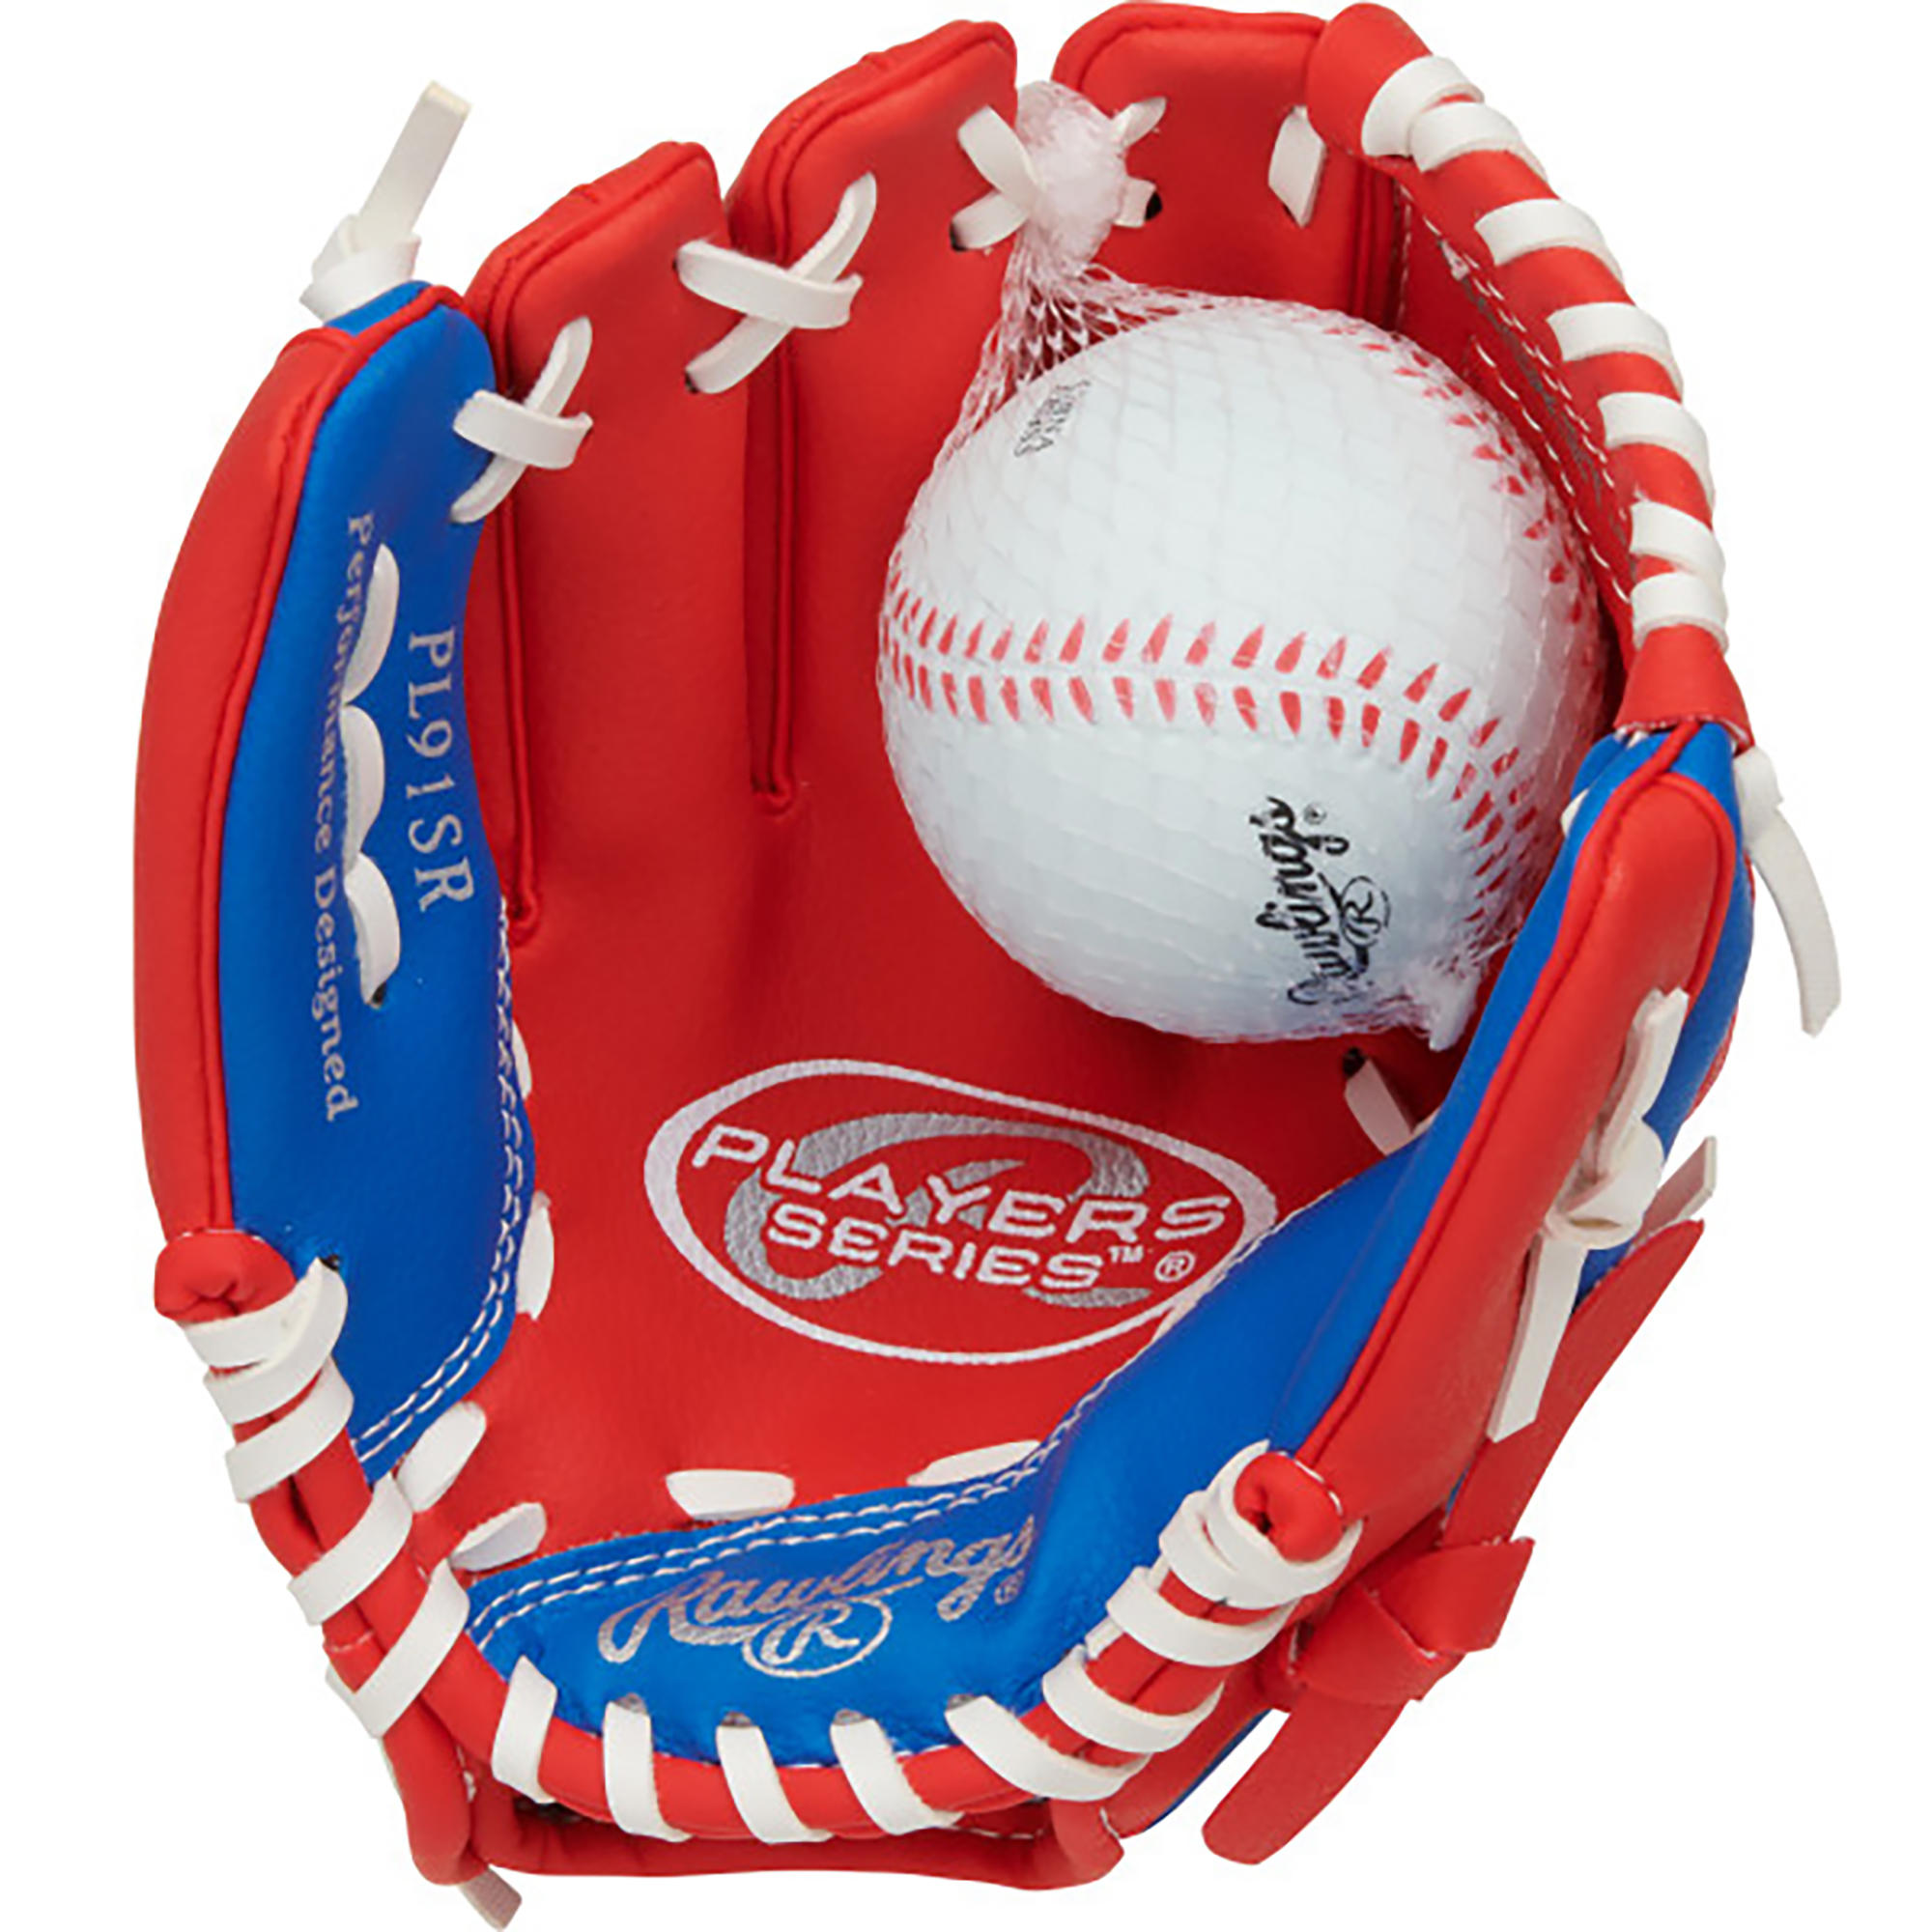 9" Right-Hand Glove with Ball